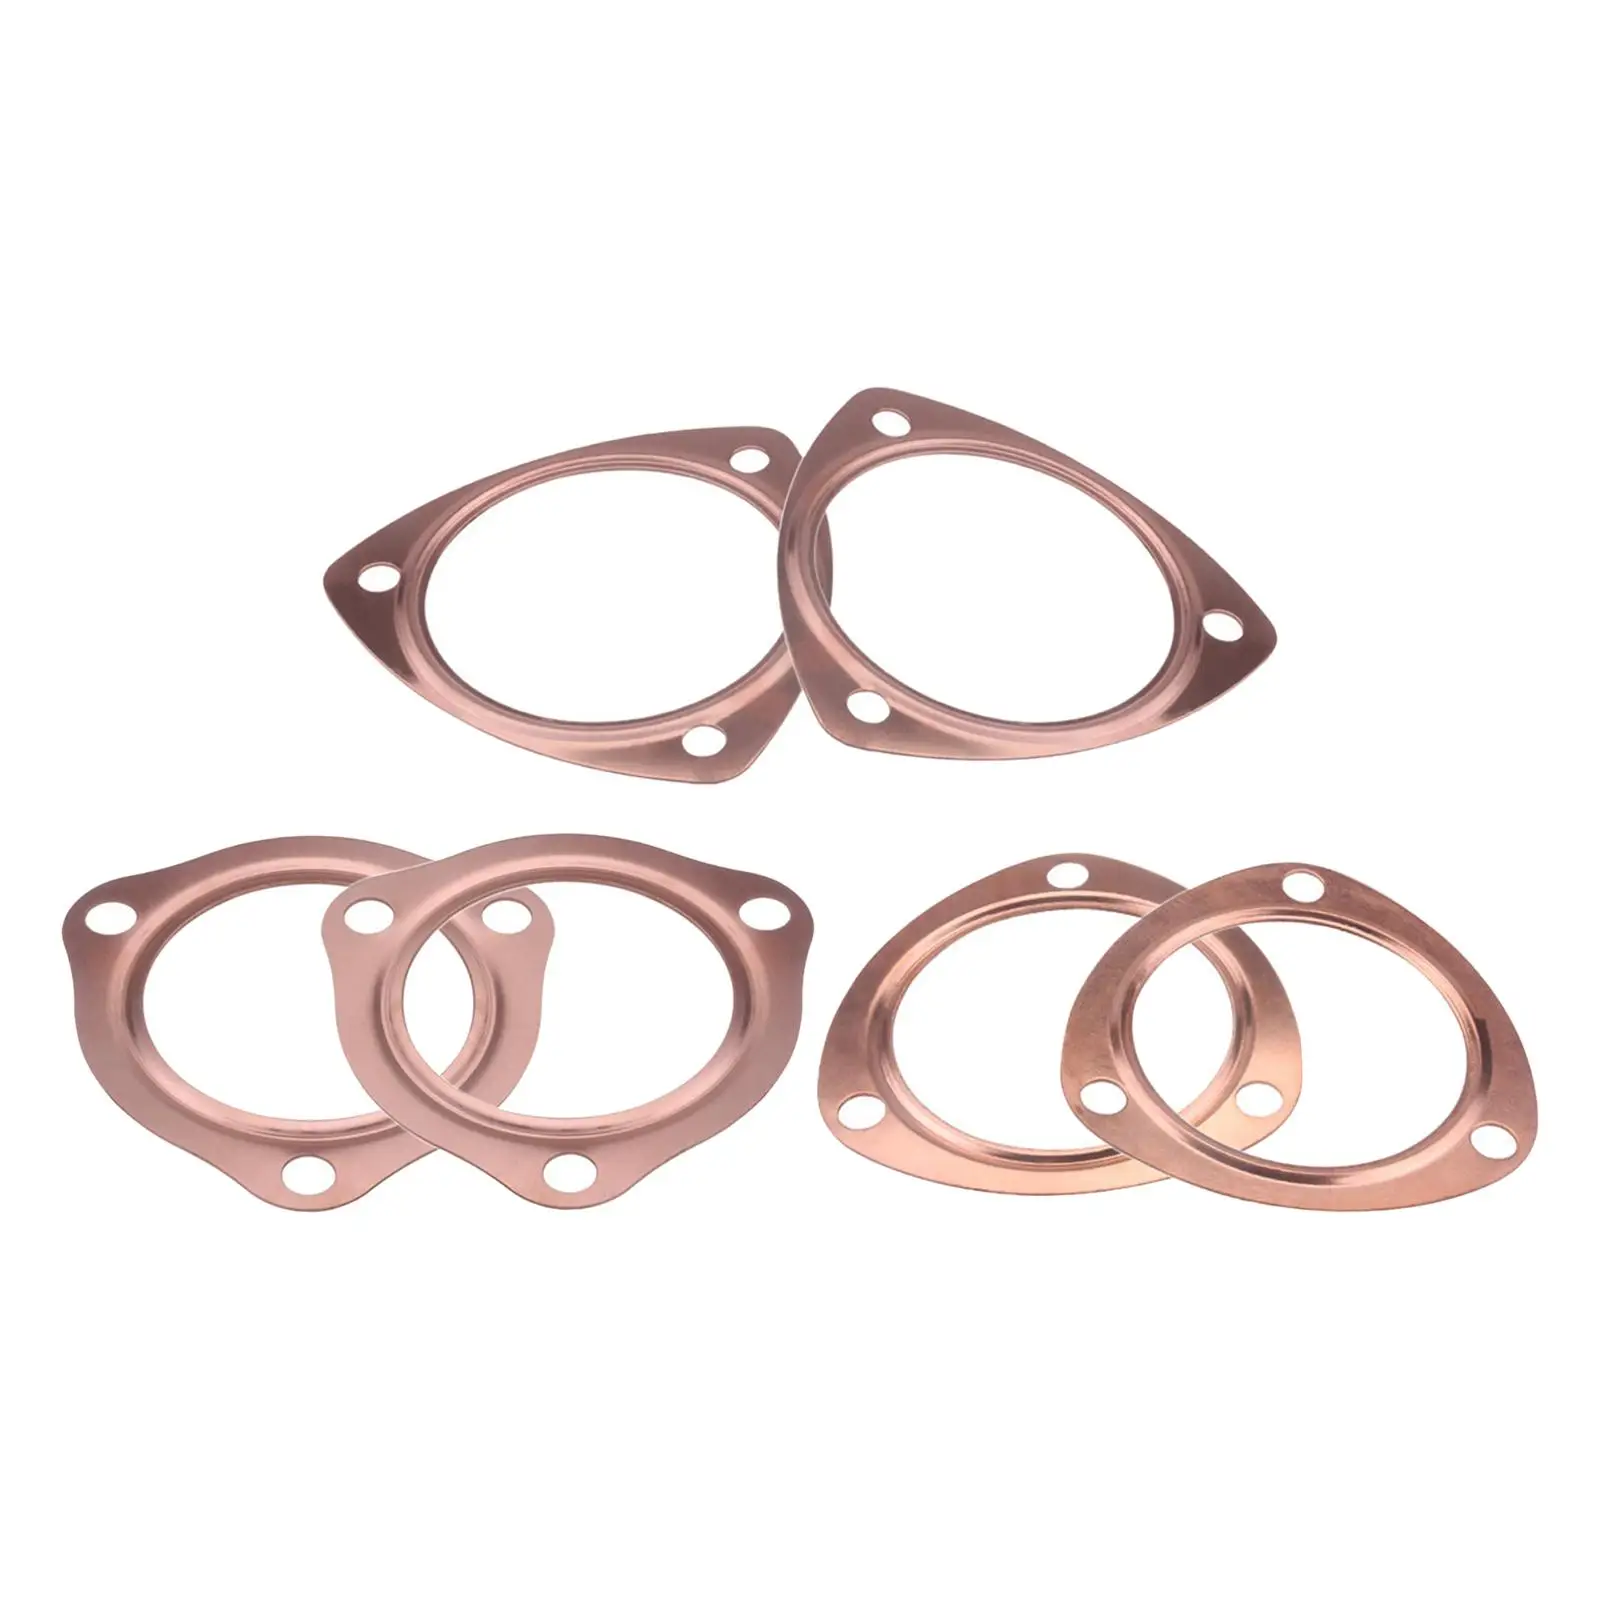 Copper Collector Gasket Wear Resisting Durable for Sbc  302 350 454